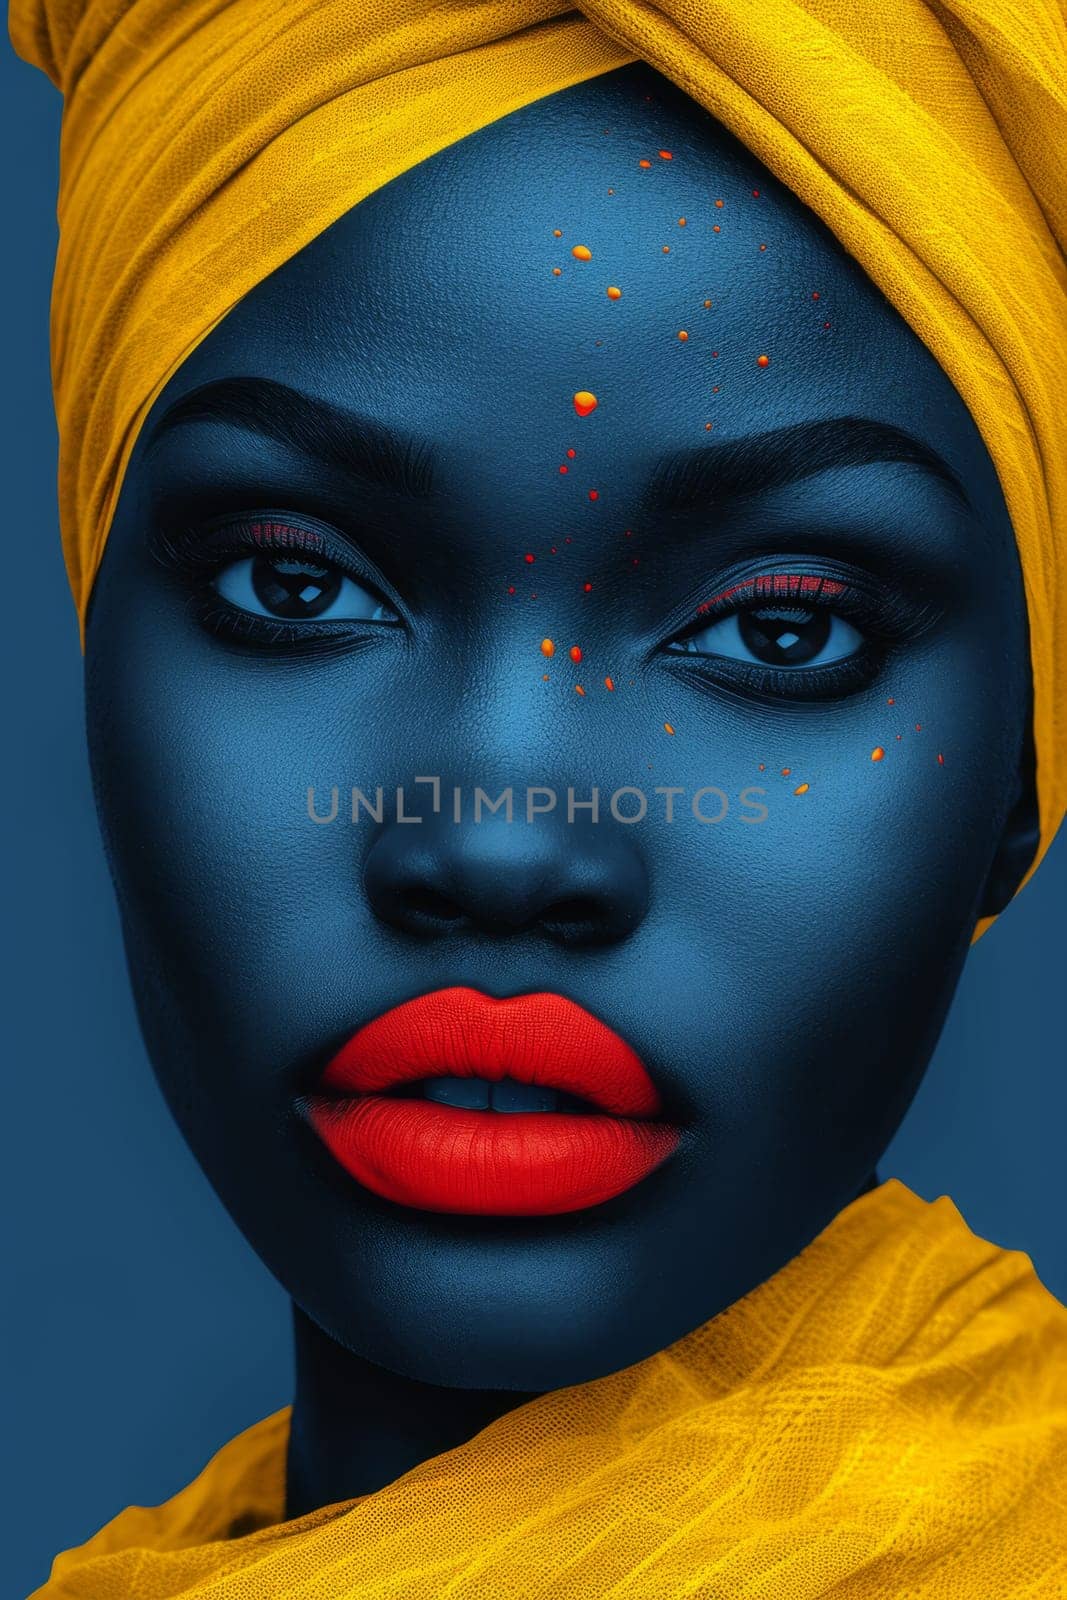 A close-up portrait of the face of a fashionable African woman in a colored headdress.